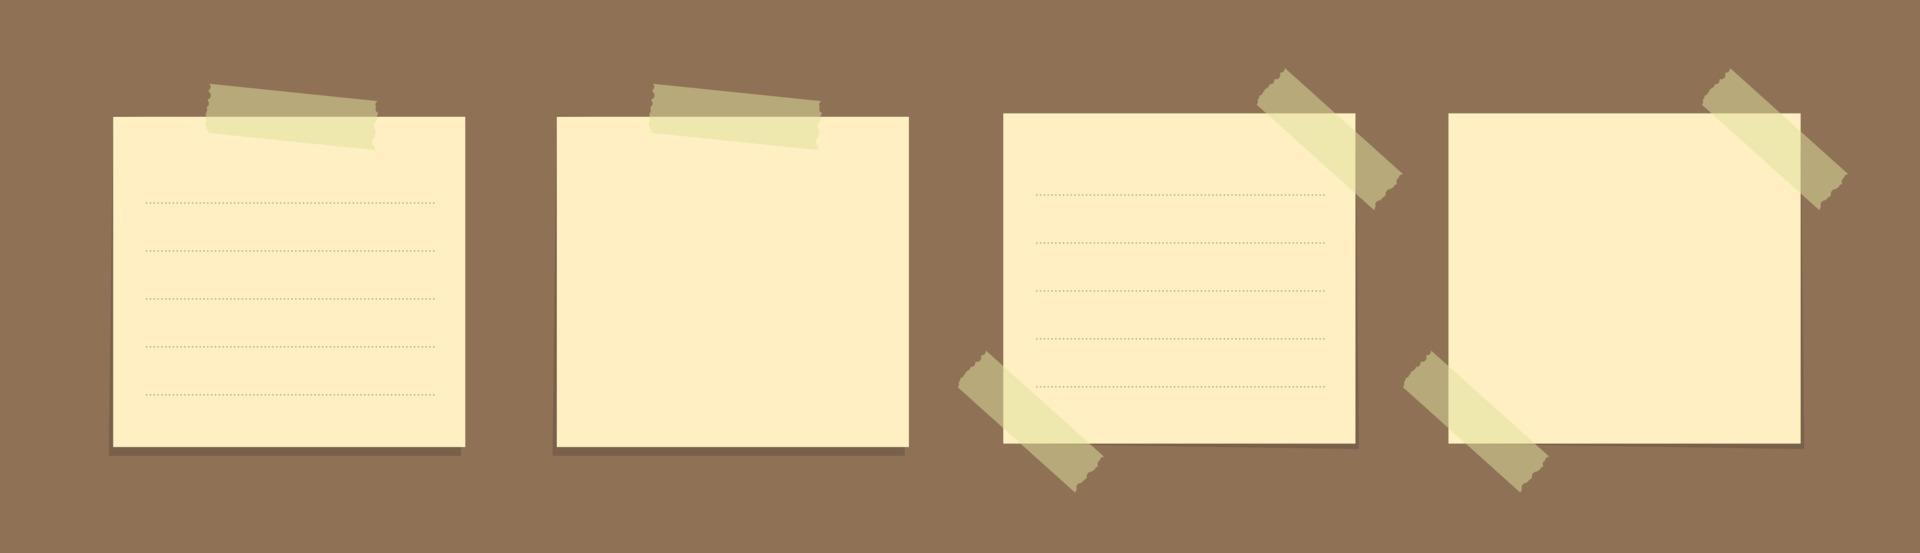 Yellow sticky note vector illustration set. Taped square office memo paper template mockup.